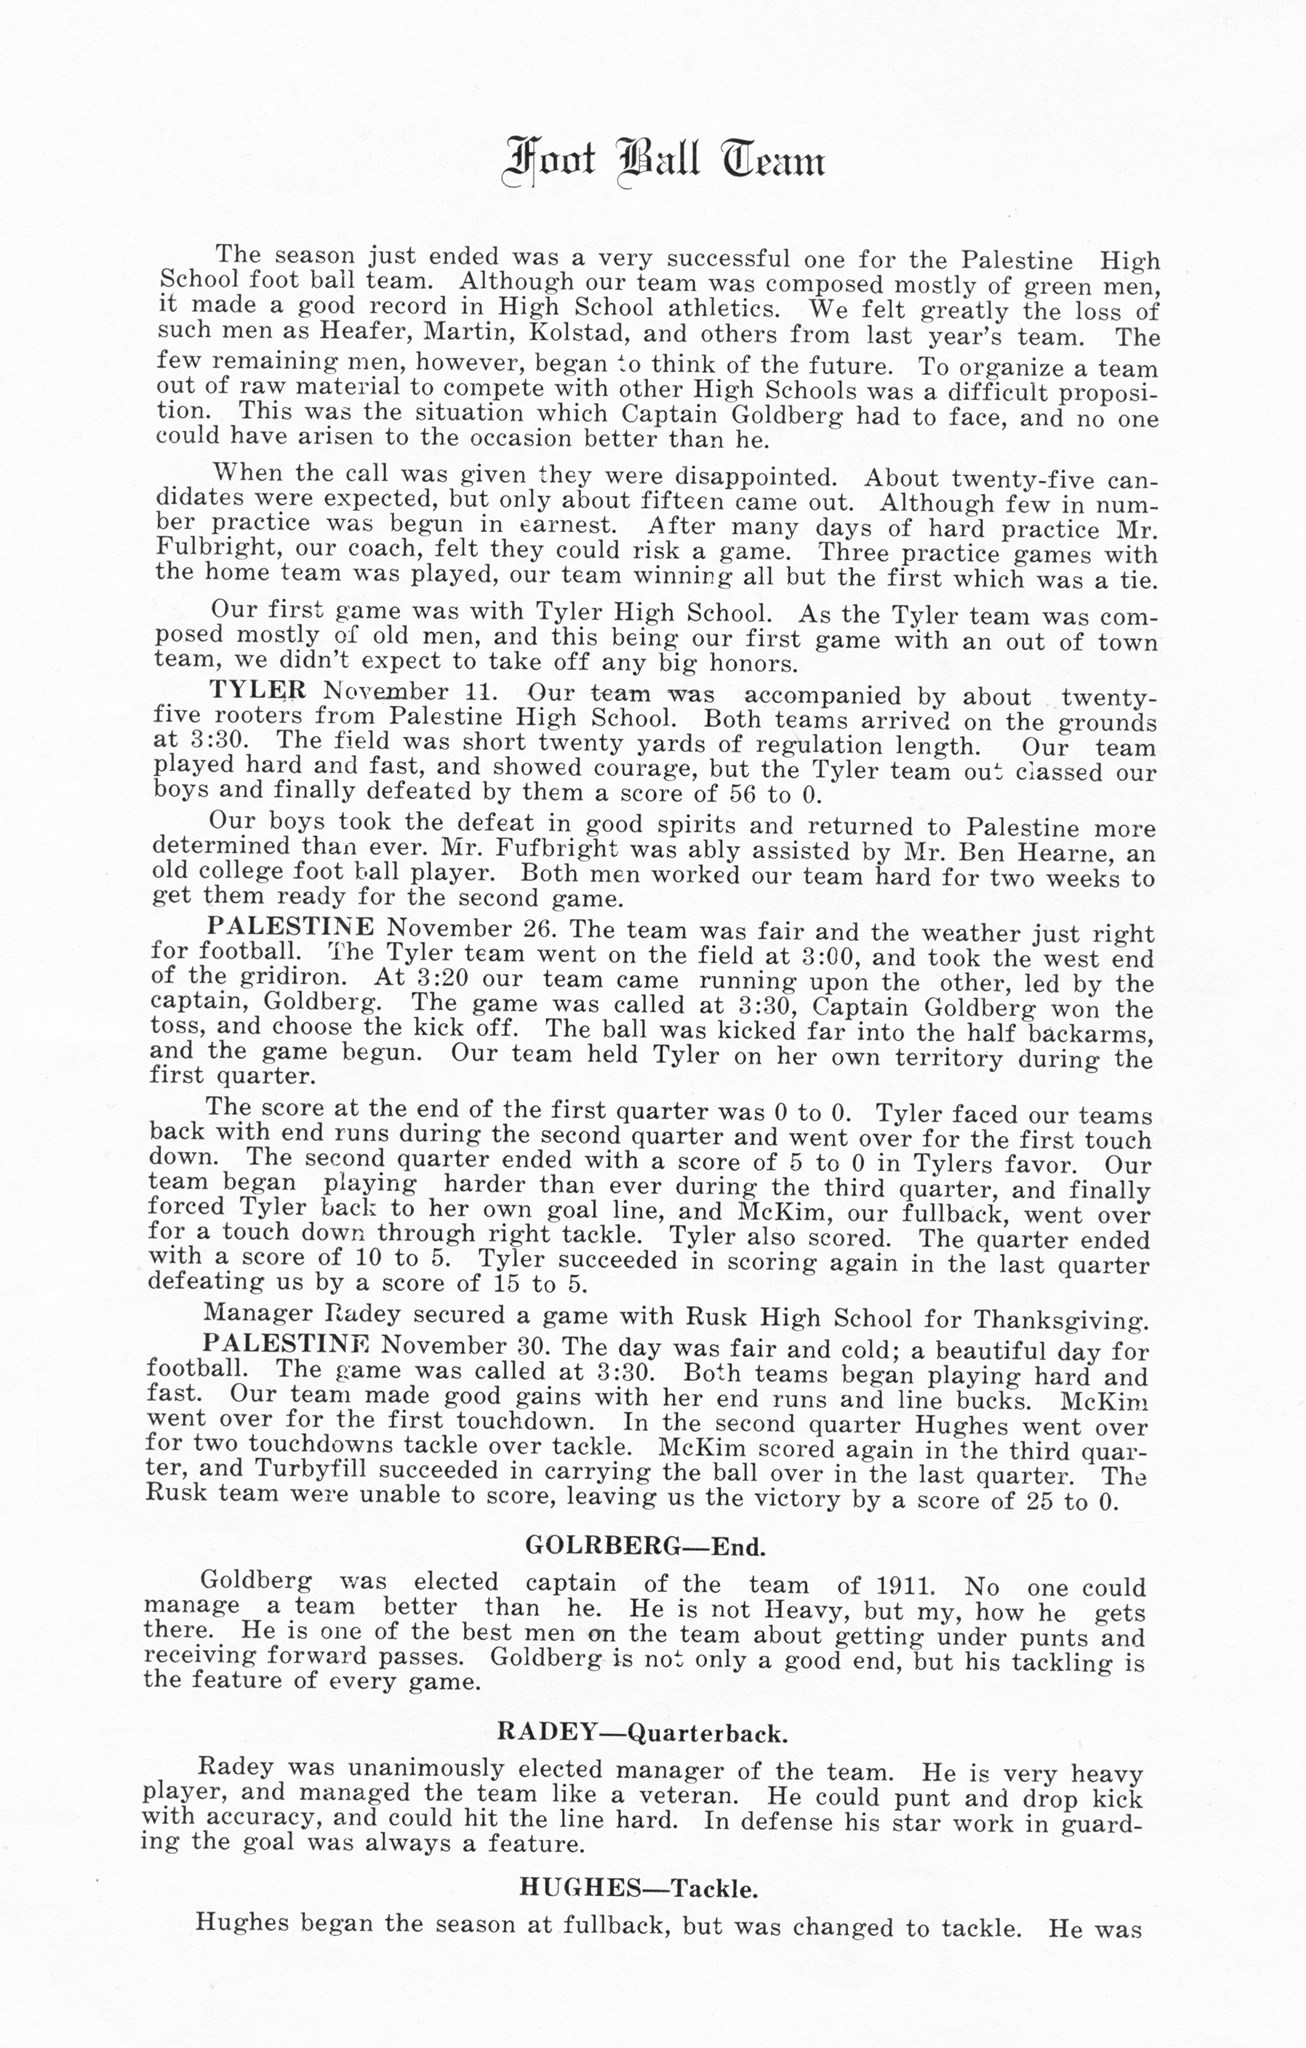 ../../../Images/Large/1912/Arclight-1912-pg0046.jpg